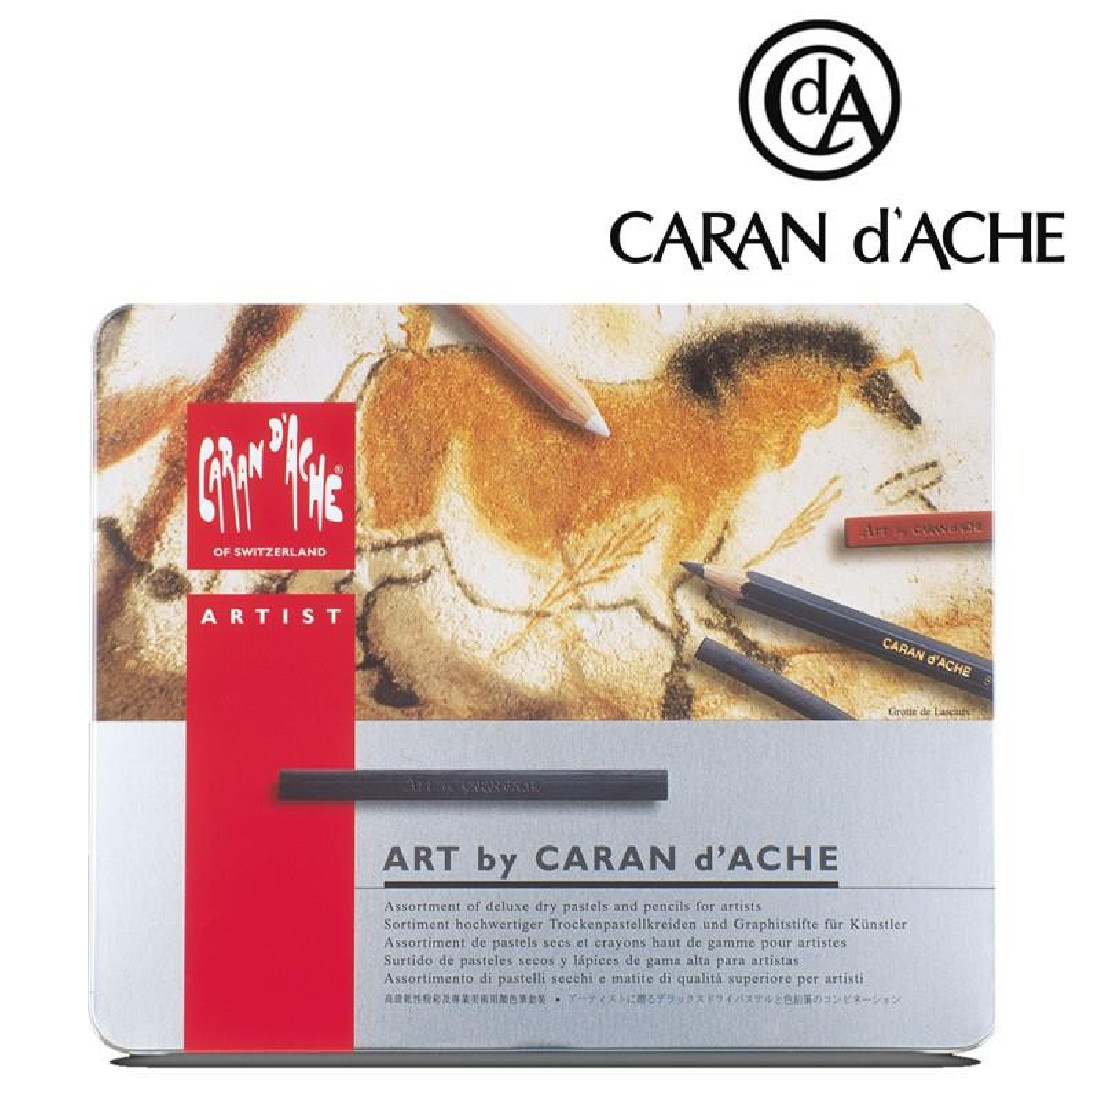 CARAN DACHE ASSORTMENT OF DELUXE DRY PASTELS AND PENCILS 0776.314